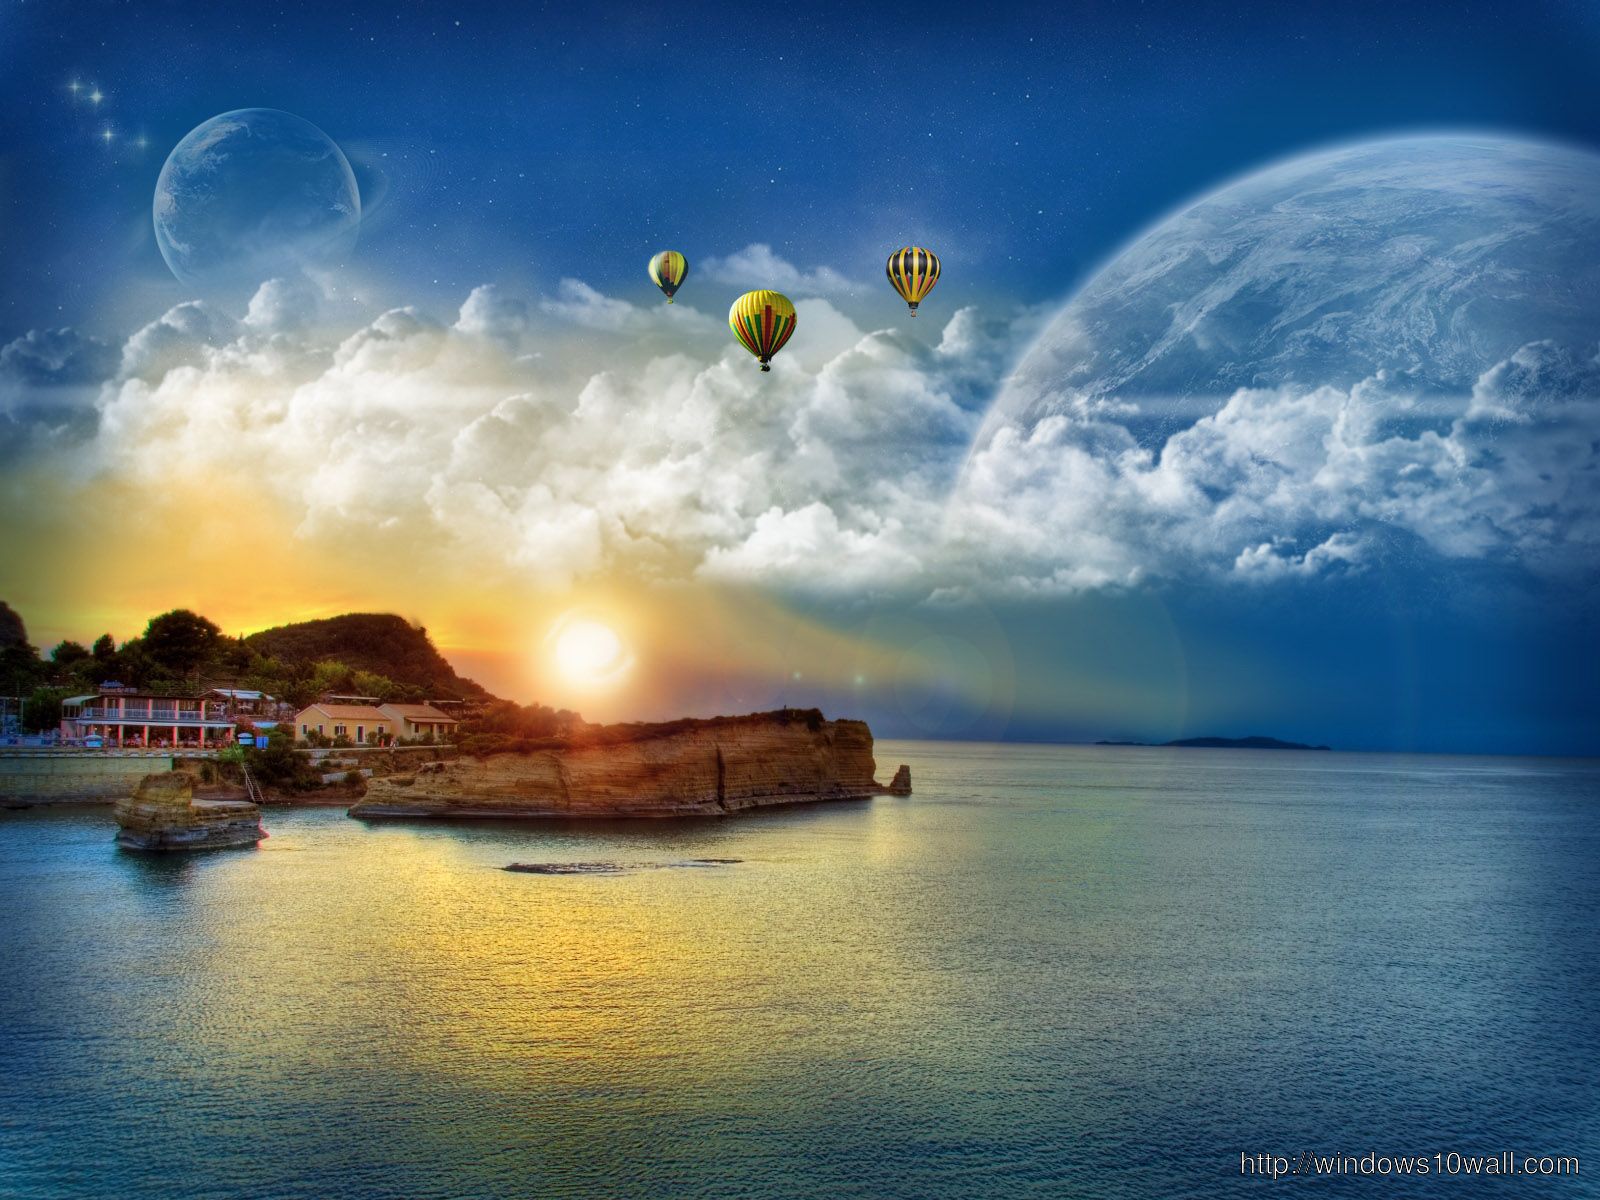 Animated Nature Background Wallpaper with Baloons